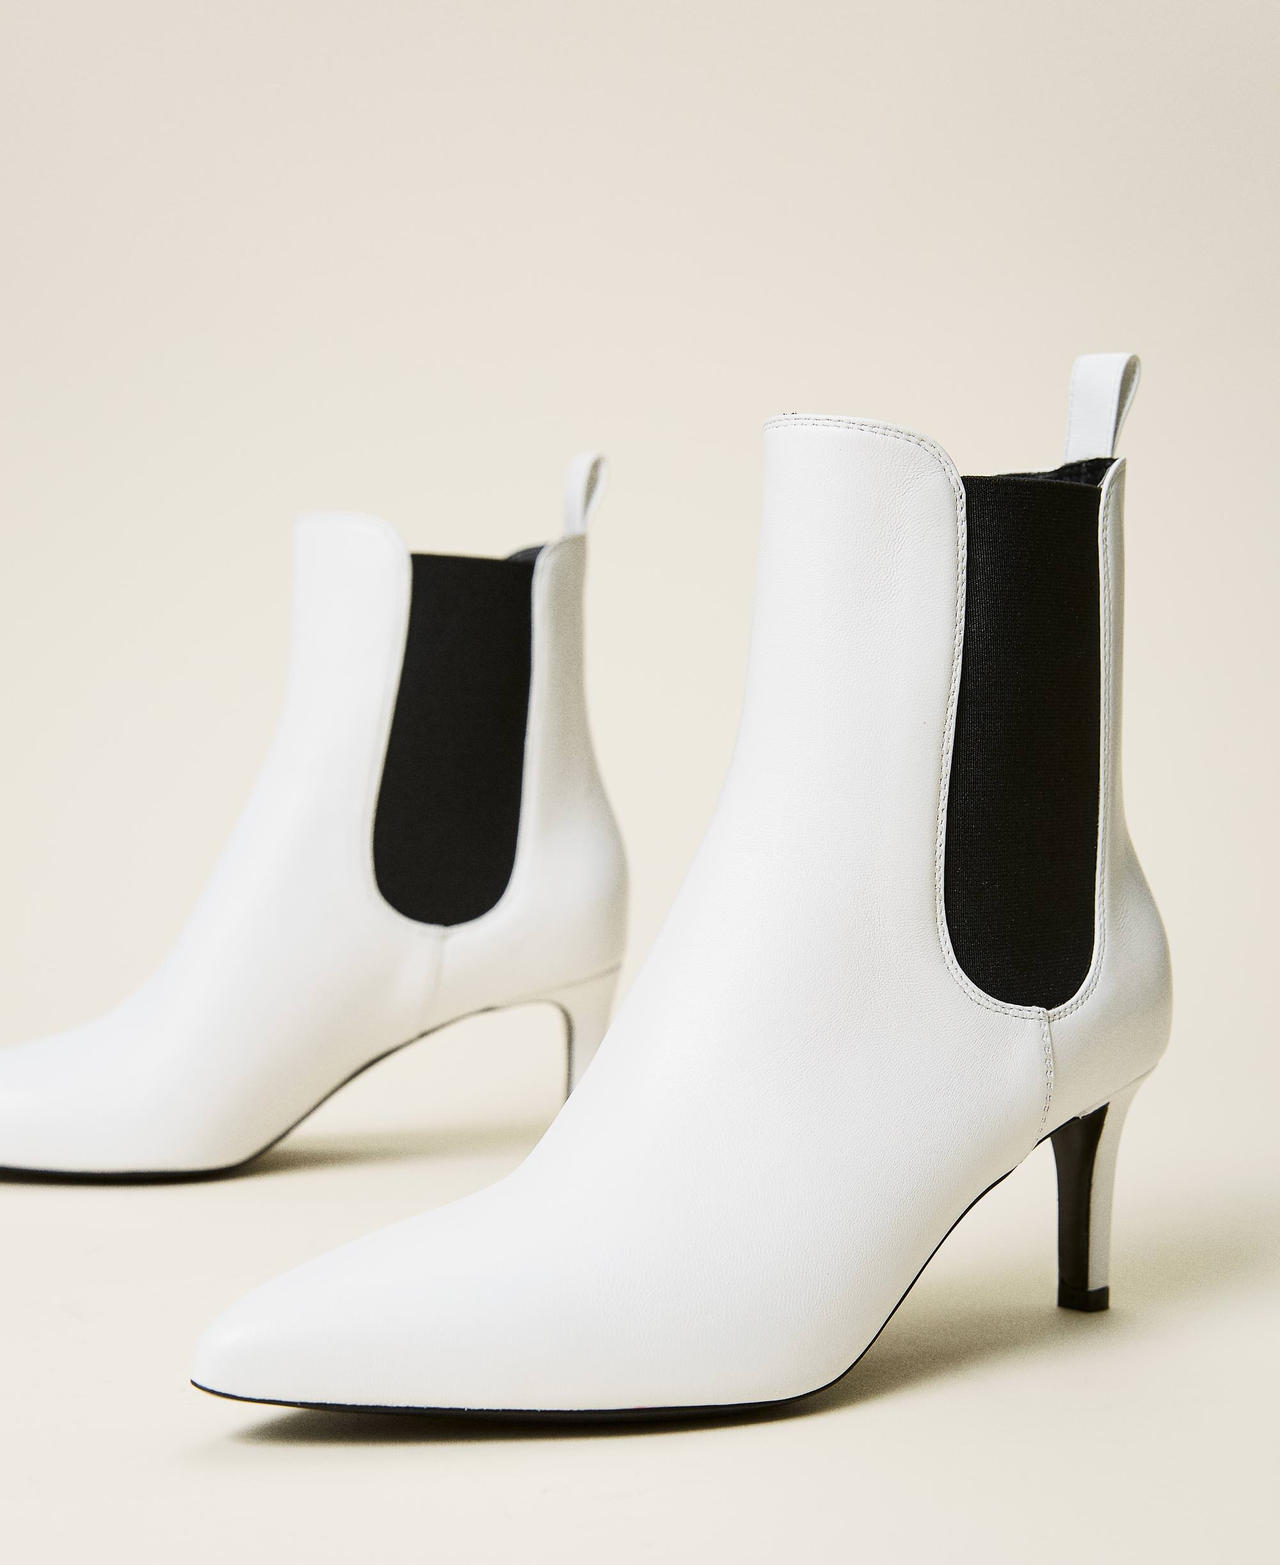 Soft nappa leather ankle boots Off White Woman 212TCT080-02